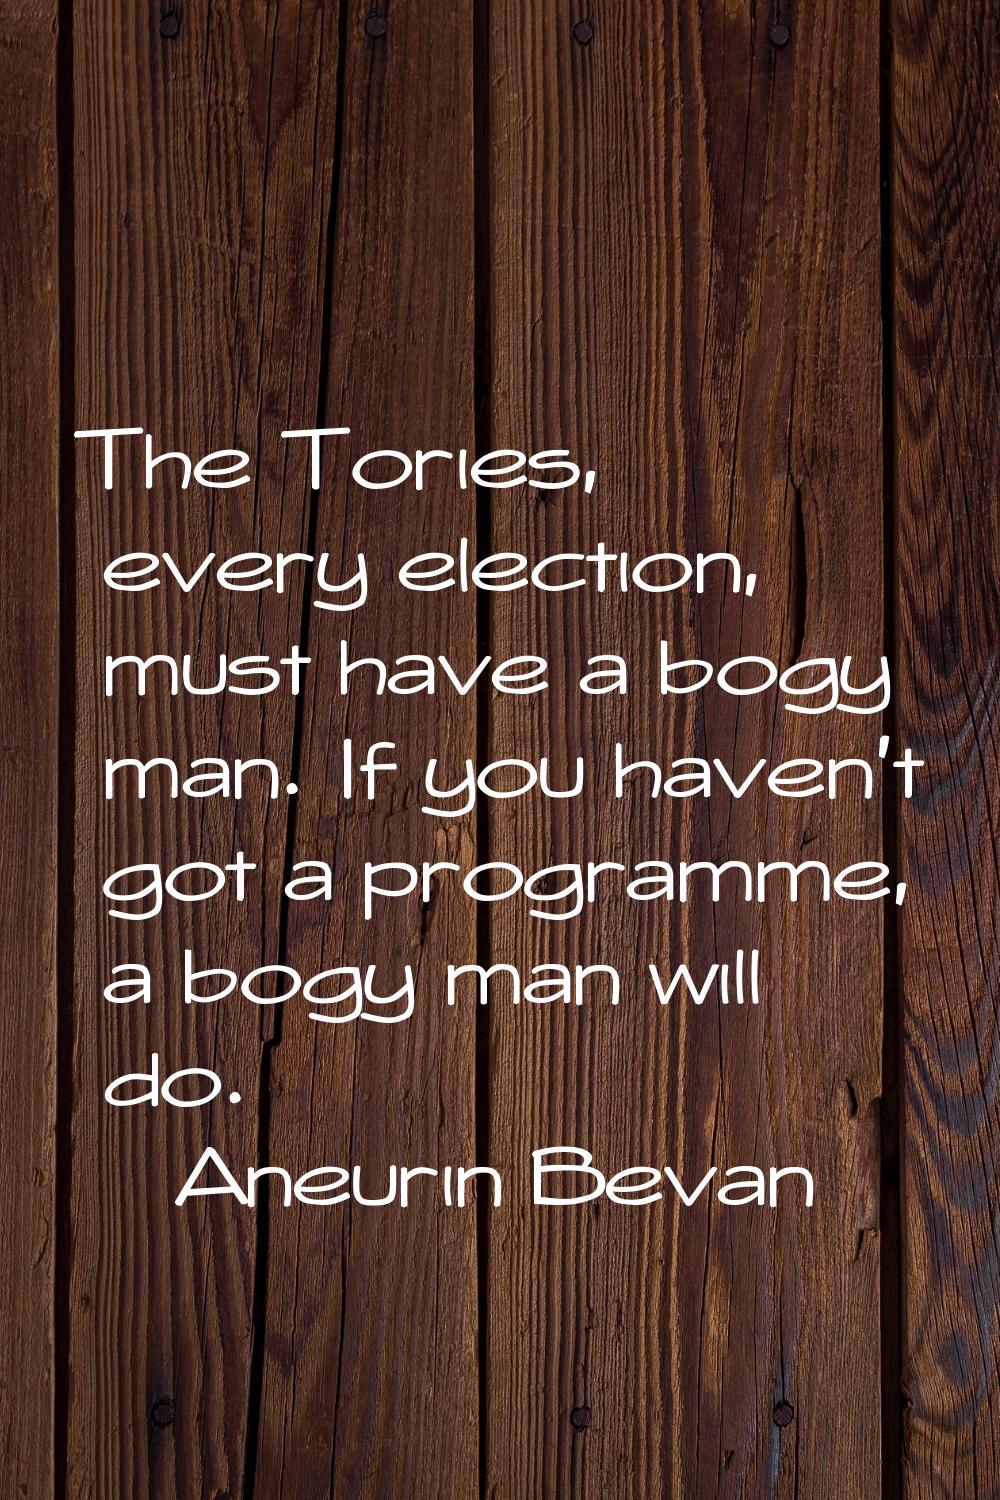 The Tories, every election, must have a bogy man. If you haven't got a programme, a bogy man will d